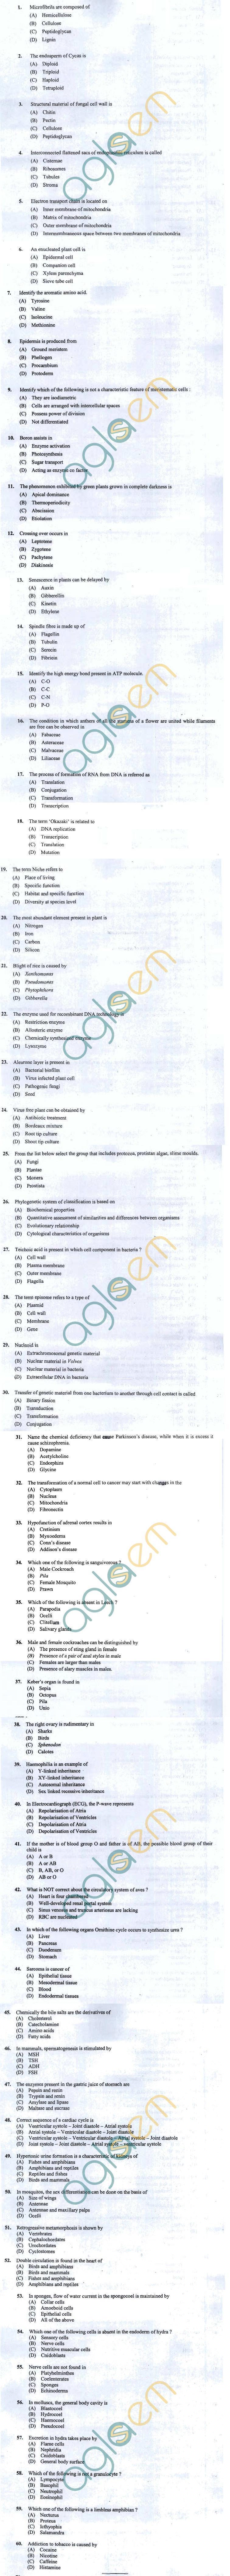 OJEE 2013 Question Paper for BIOLOGY